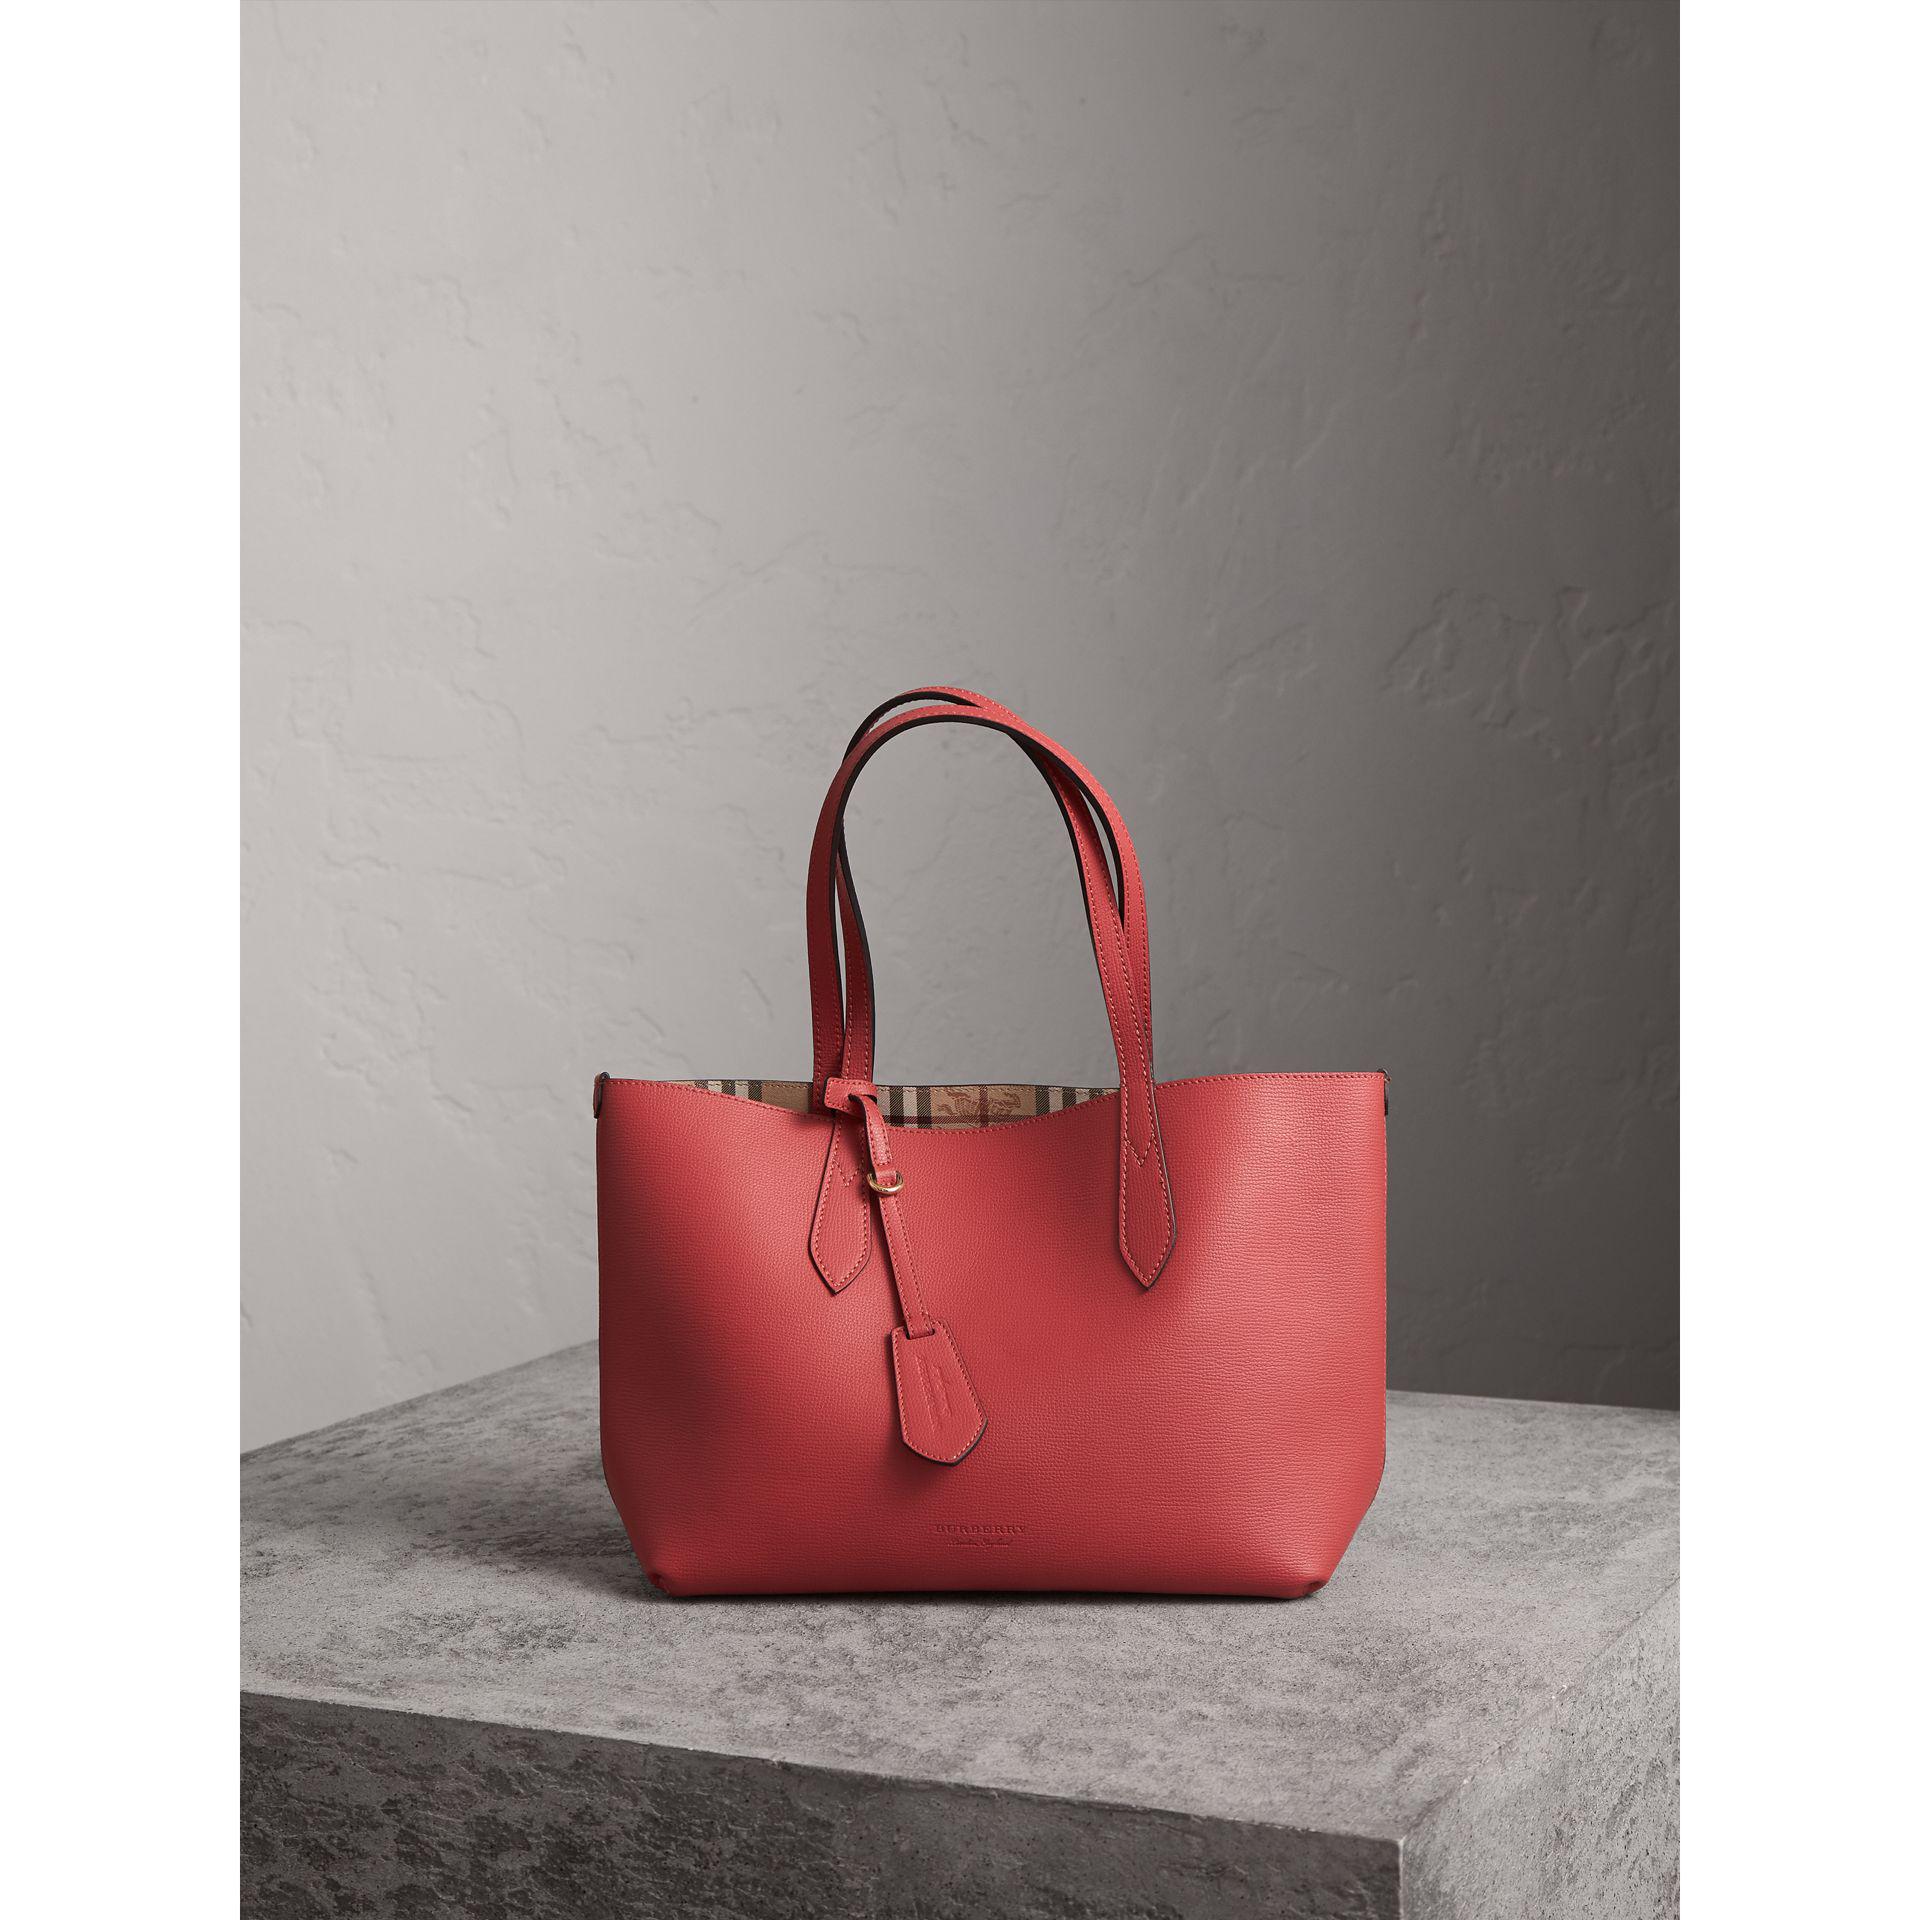 Burberry The Medium Reversible Tote In Haymarket Check And Leather Coral  Red - Lyst